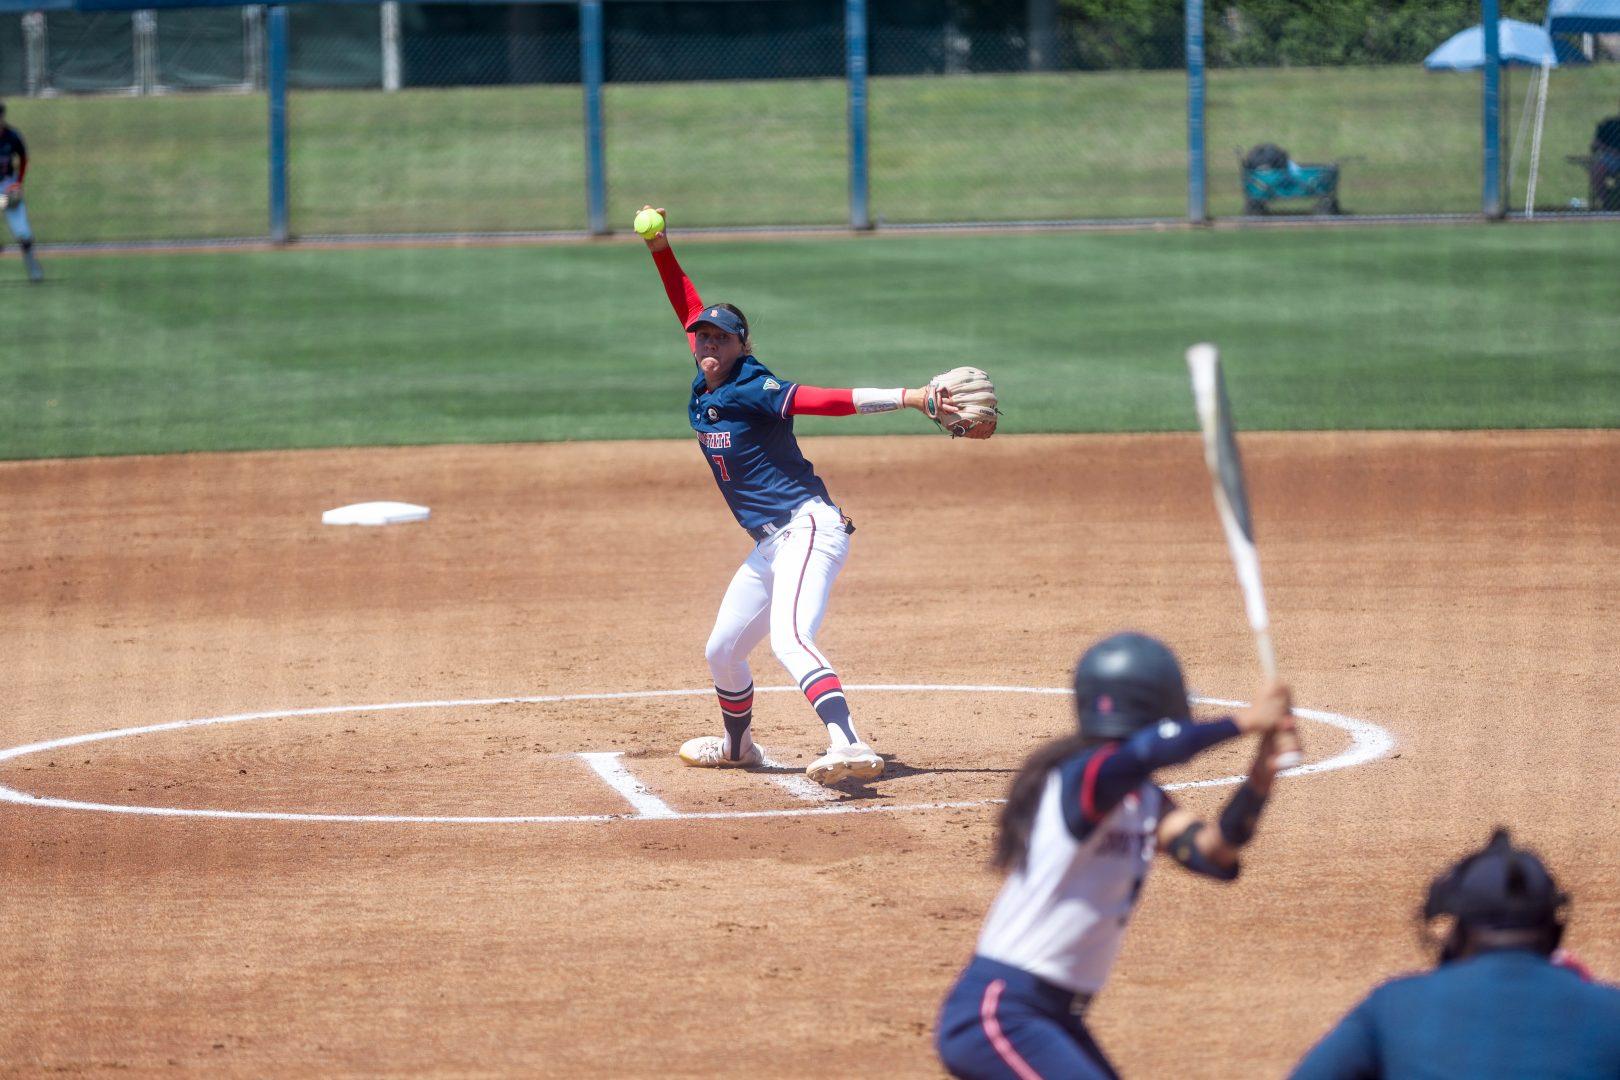 Fresno State right-handed pitcher Hailey Dolcini pitches during the first inning of the doubleheader against Saint Marys at Margie Wright Diamond on Saturday, April 17, 2021. (Vendila Yang/ The Collegian)